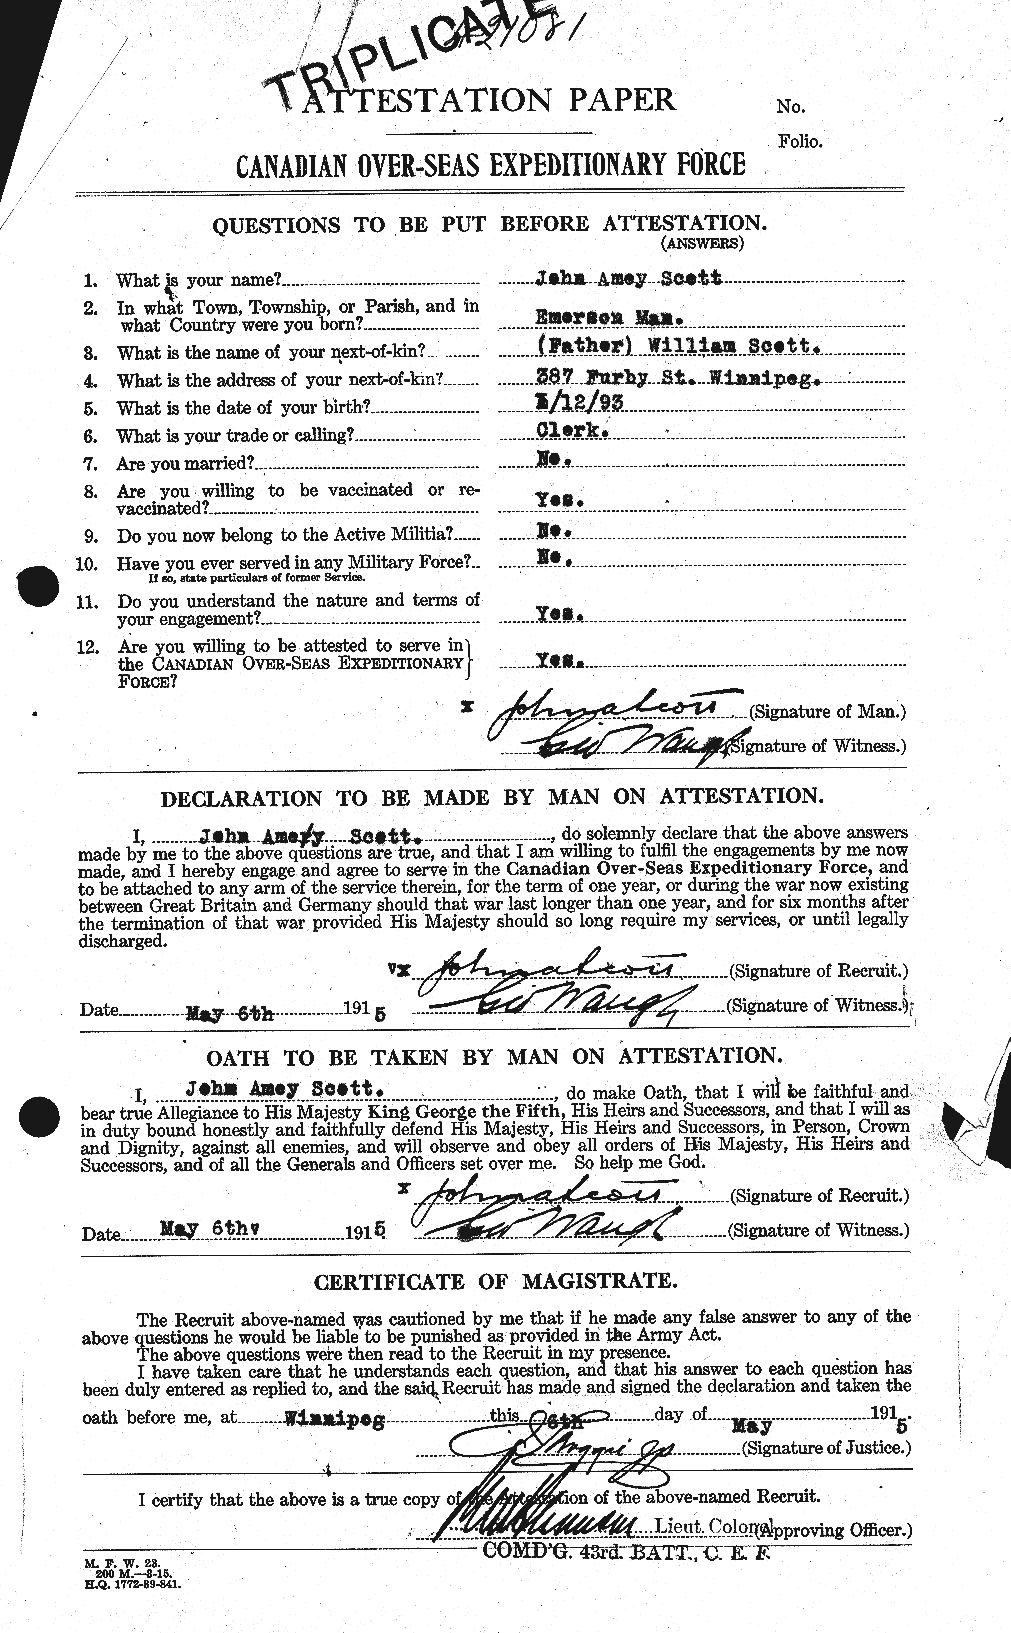 Personnel Records of the First World War - CEF 084661a